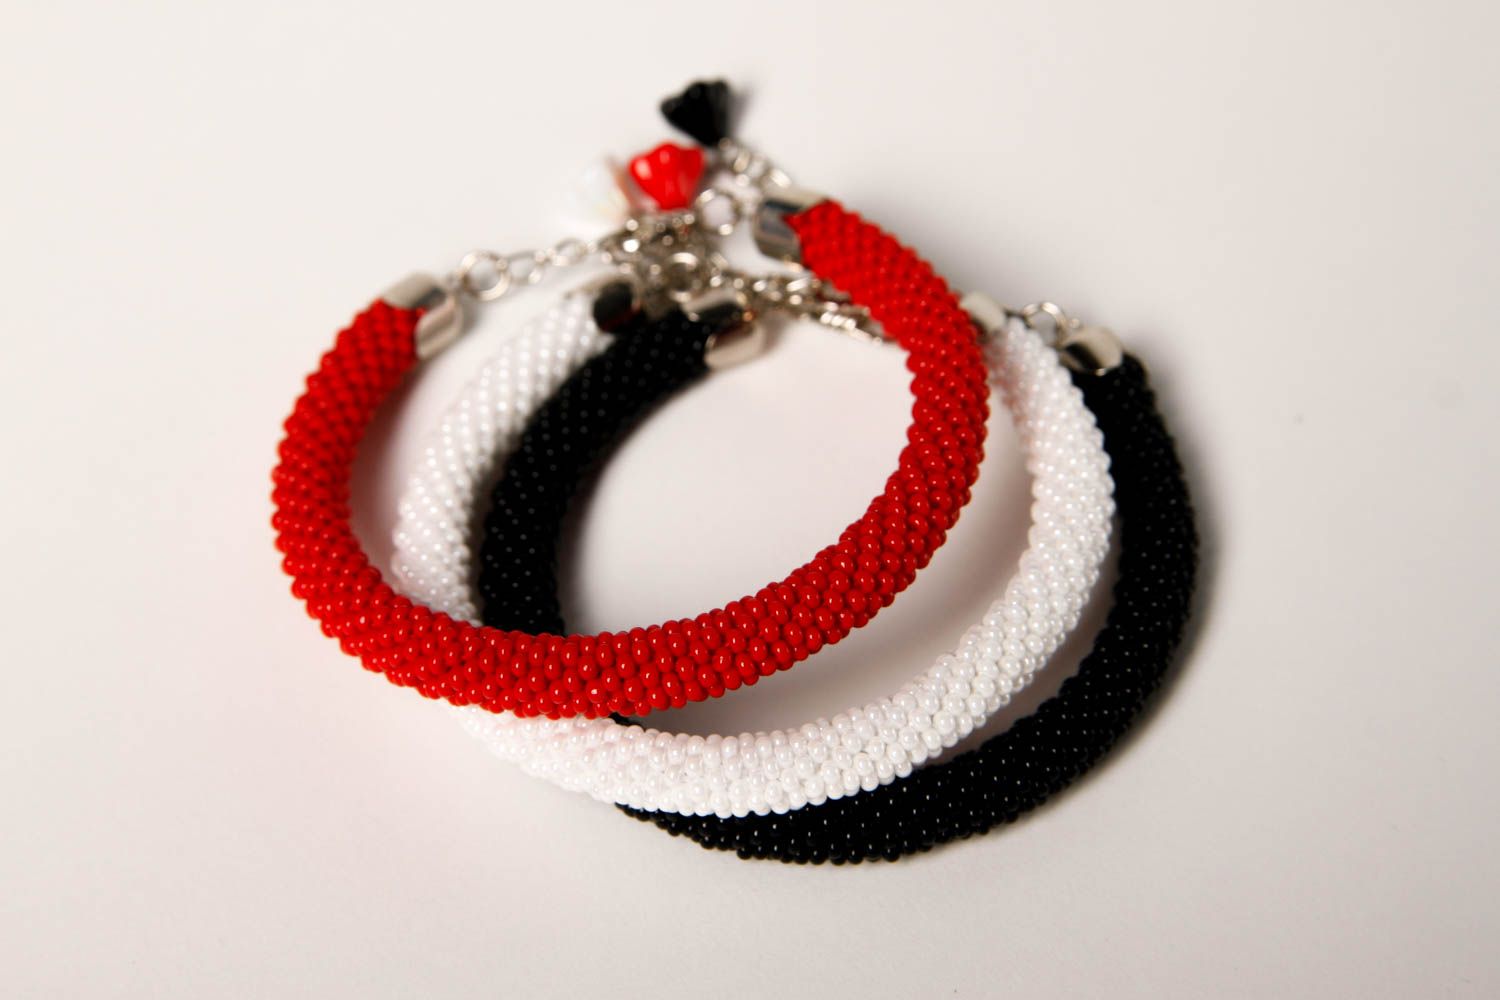 Handmade three-row beaded cord bracelet in black, red, and white colors photo 3